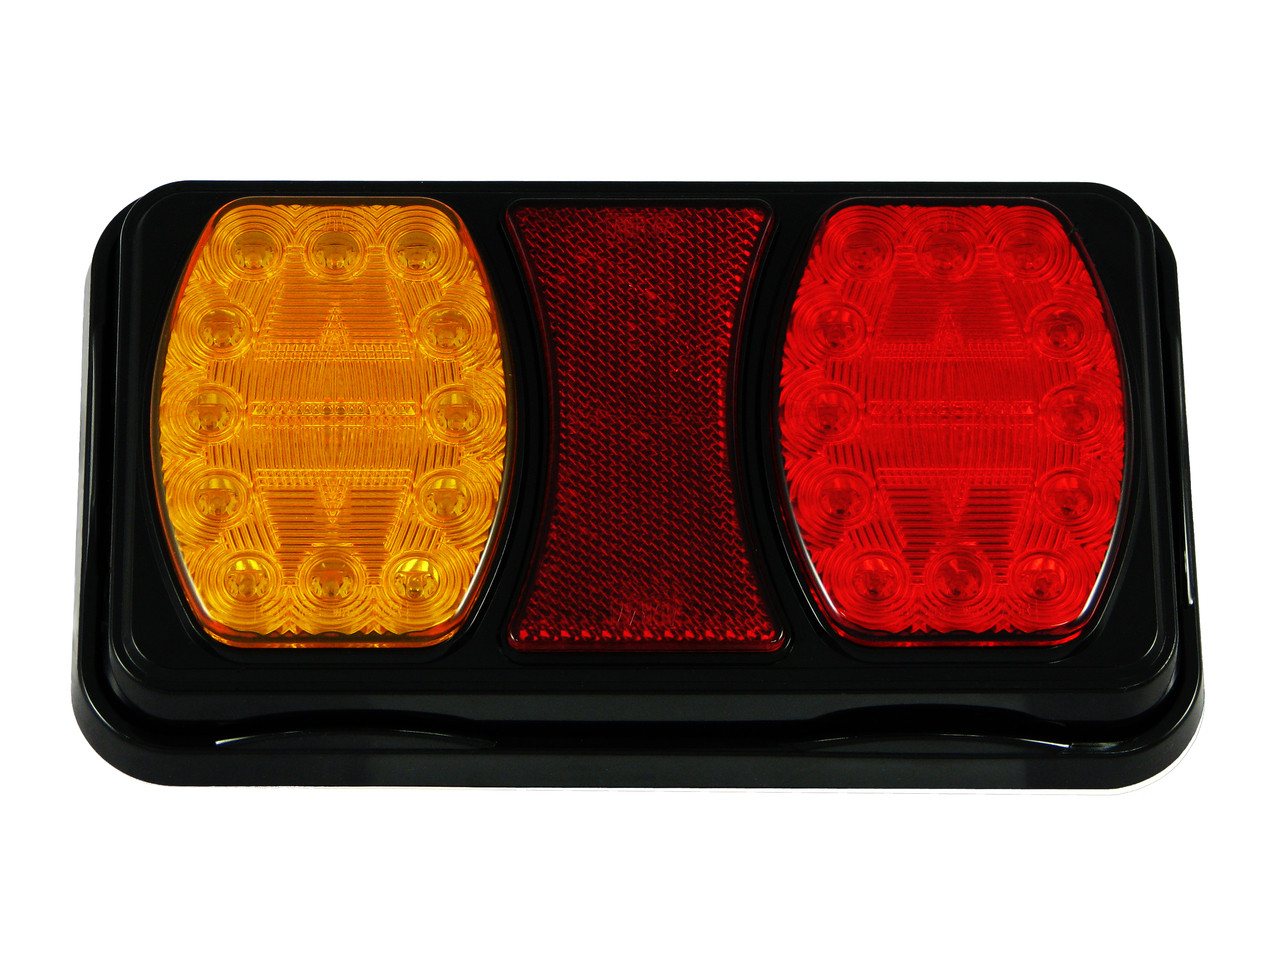 228RV. Compact LED Tail Light. Stop, Tail Indicator Lamp with built-in Reflectors. Quality, Tough Light. Caravan Friendly. Multi-Volt 12 & 24 Volt Systems. BR100AR. Twin Module LED Light.  Truck, Trailer, Ute or Caravan Tail Light Assembly. Built-in Reflector. Great Quality Tail Light. Weather, Vibration and Dust Proof. Ultimate LED